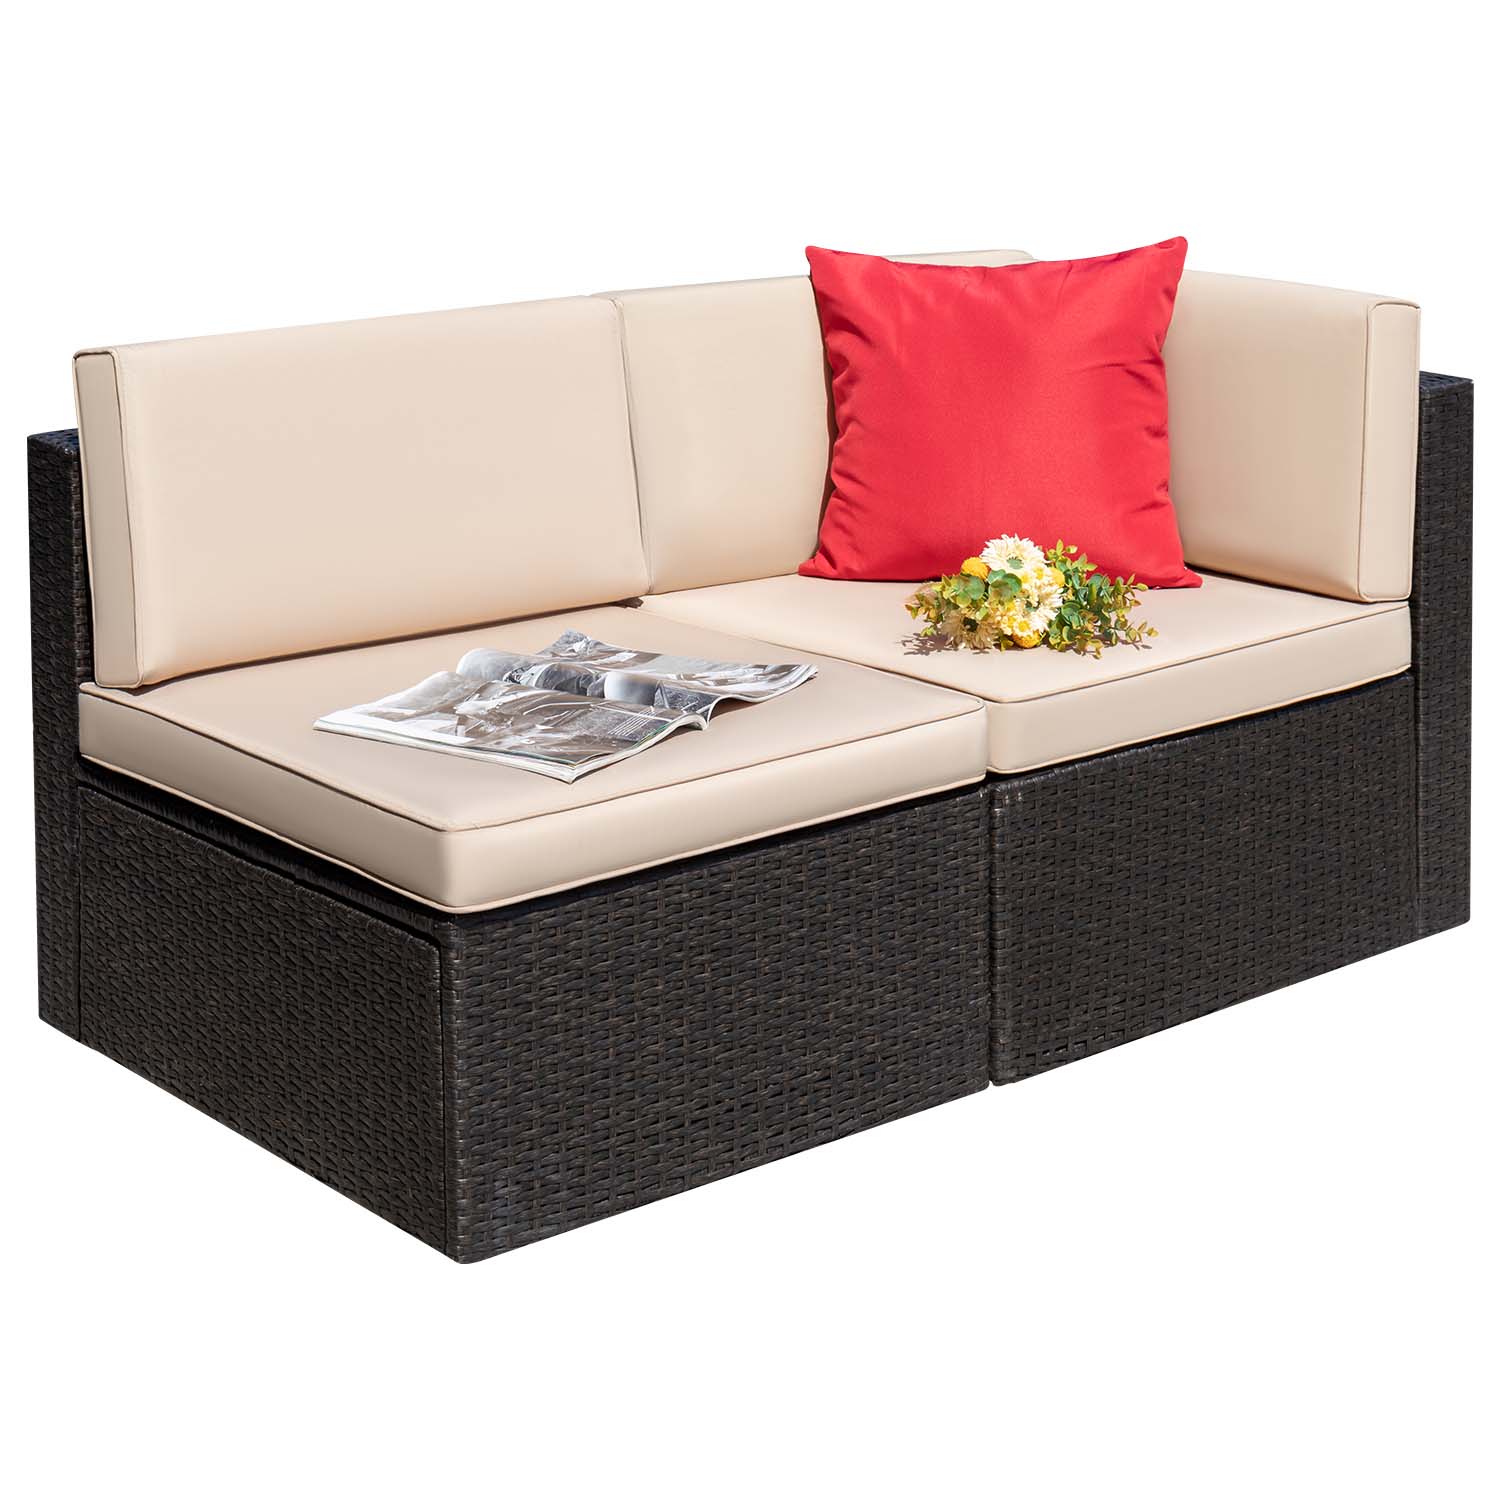 Devoko 2 Pieces Patio Sectional Set Outdoor Rattan Loveseat with Cushions & Red Pillow, Beige - image 3 of 6